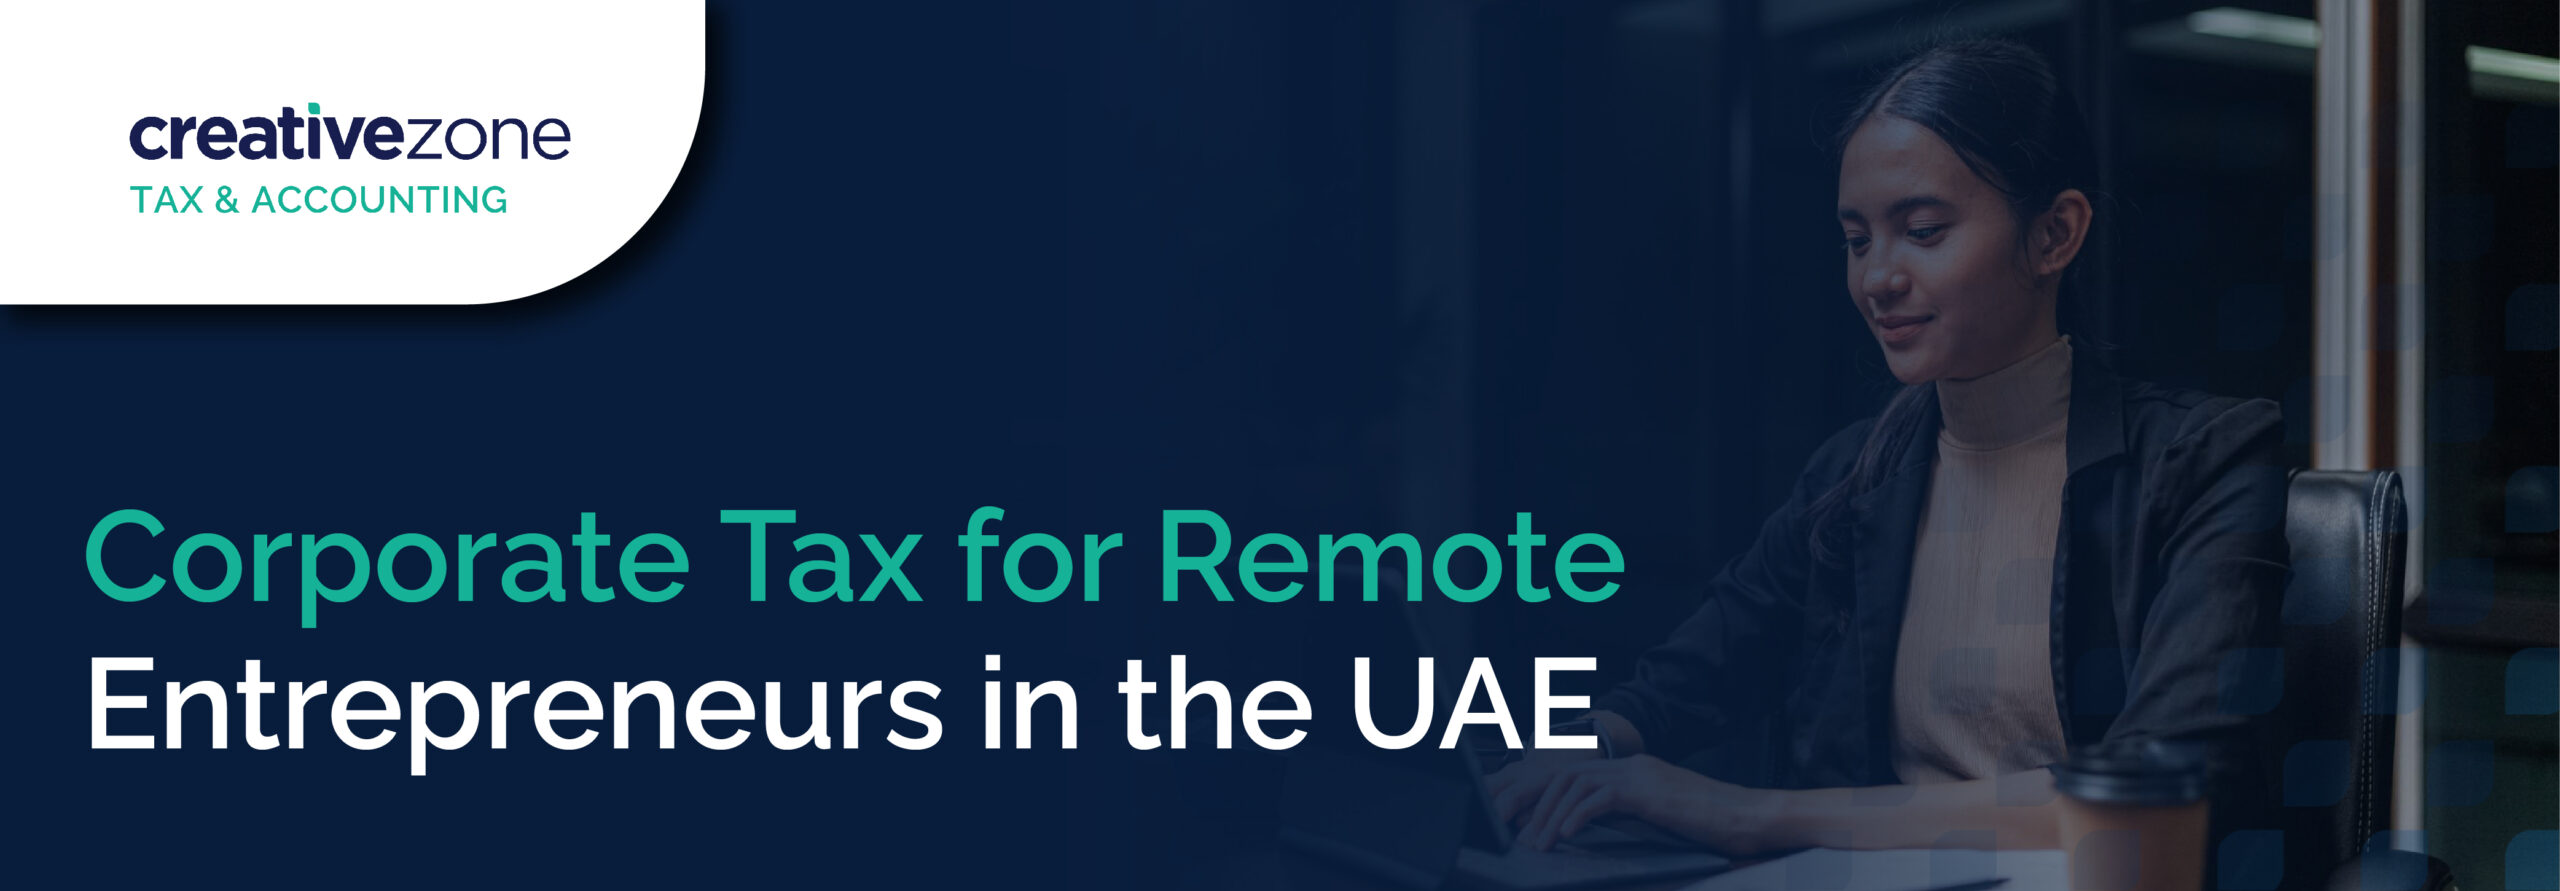 Corporate Tax for Remote Entrepreneurs in The UAE